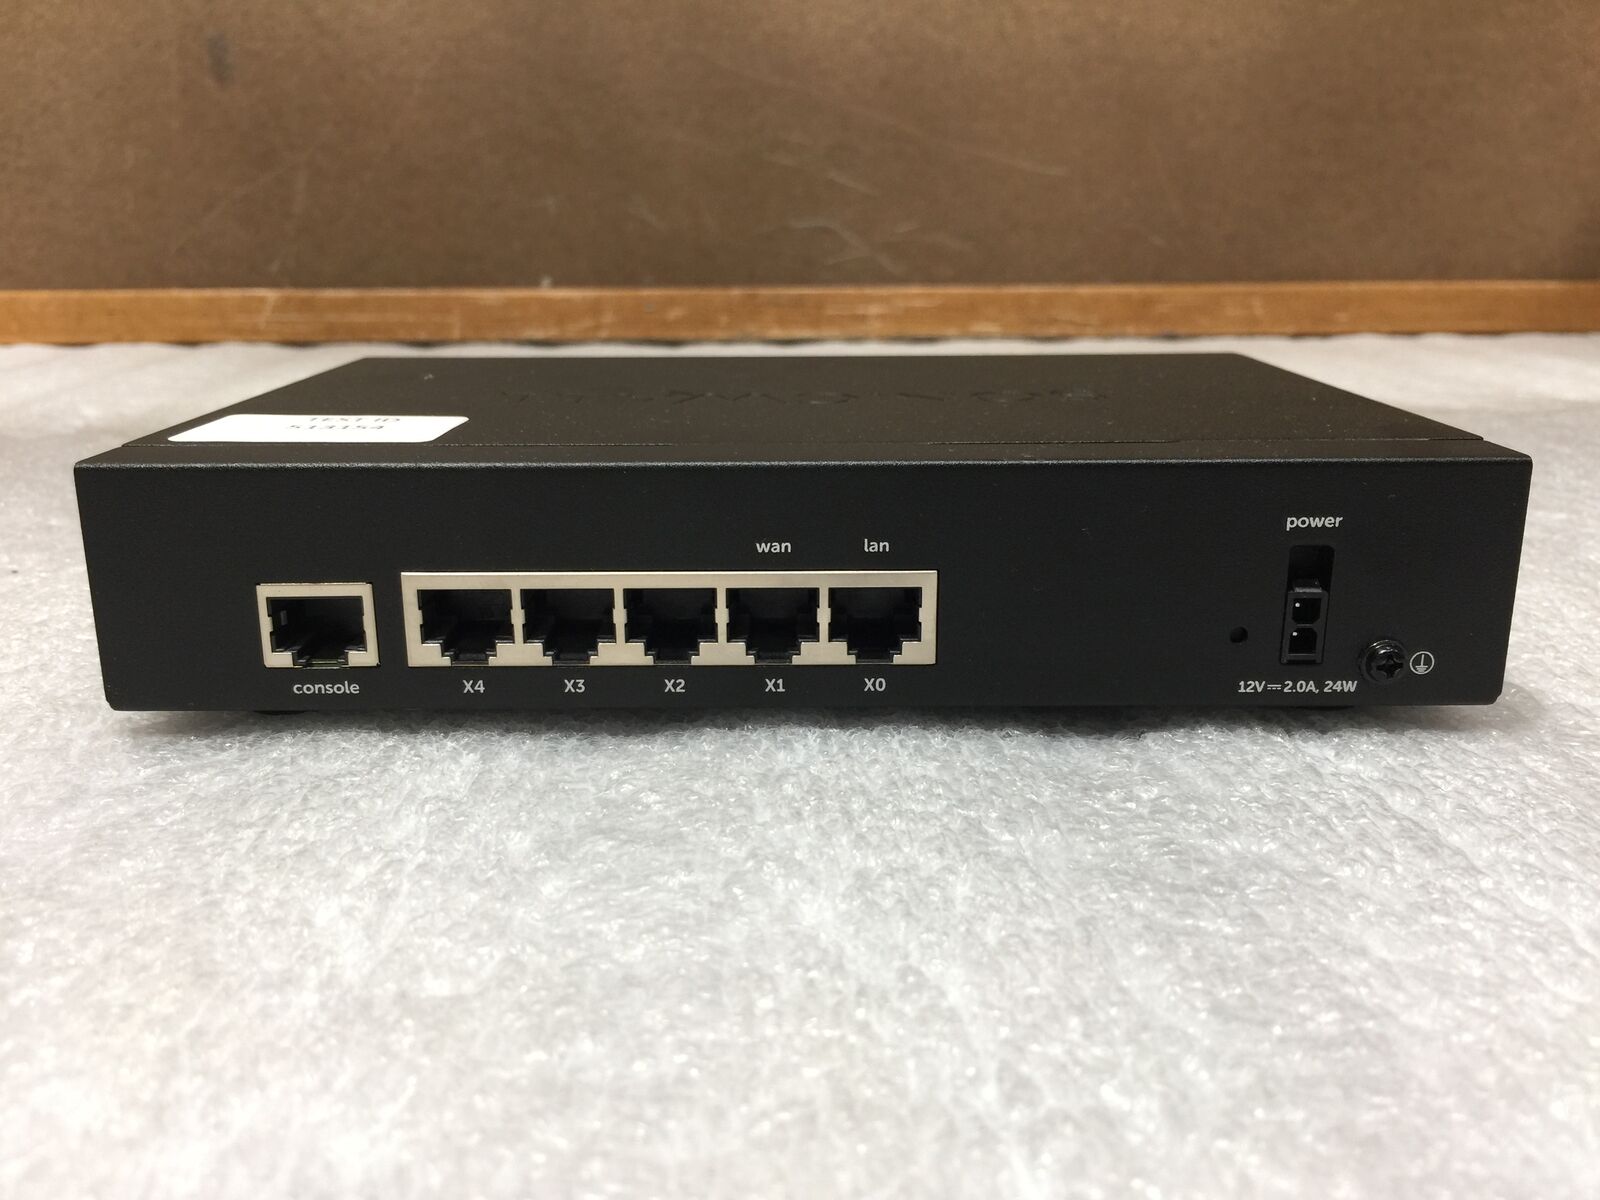 Dell SonicWall TZ300 Firewall Network Security Appliance Model APL28-0B4